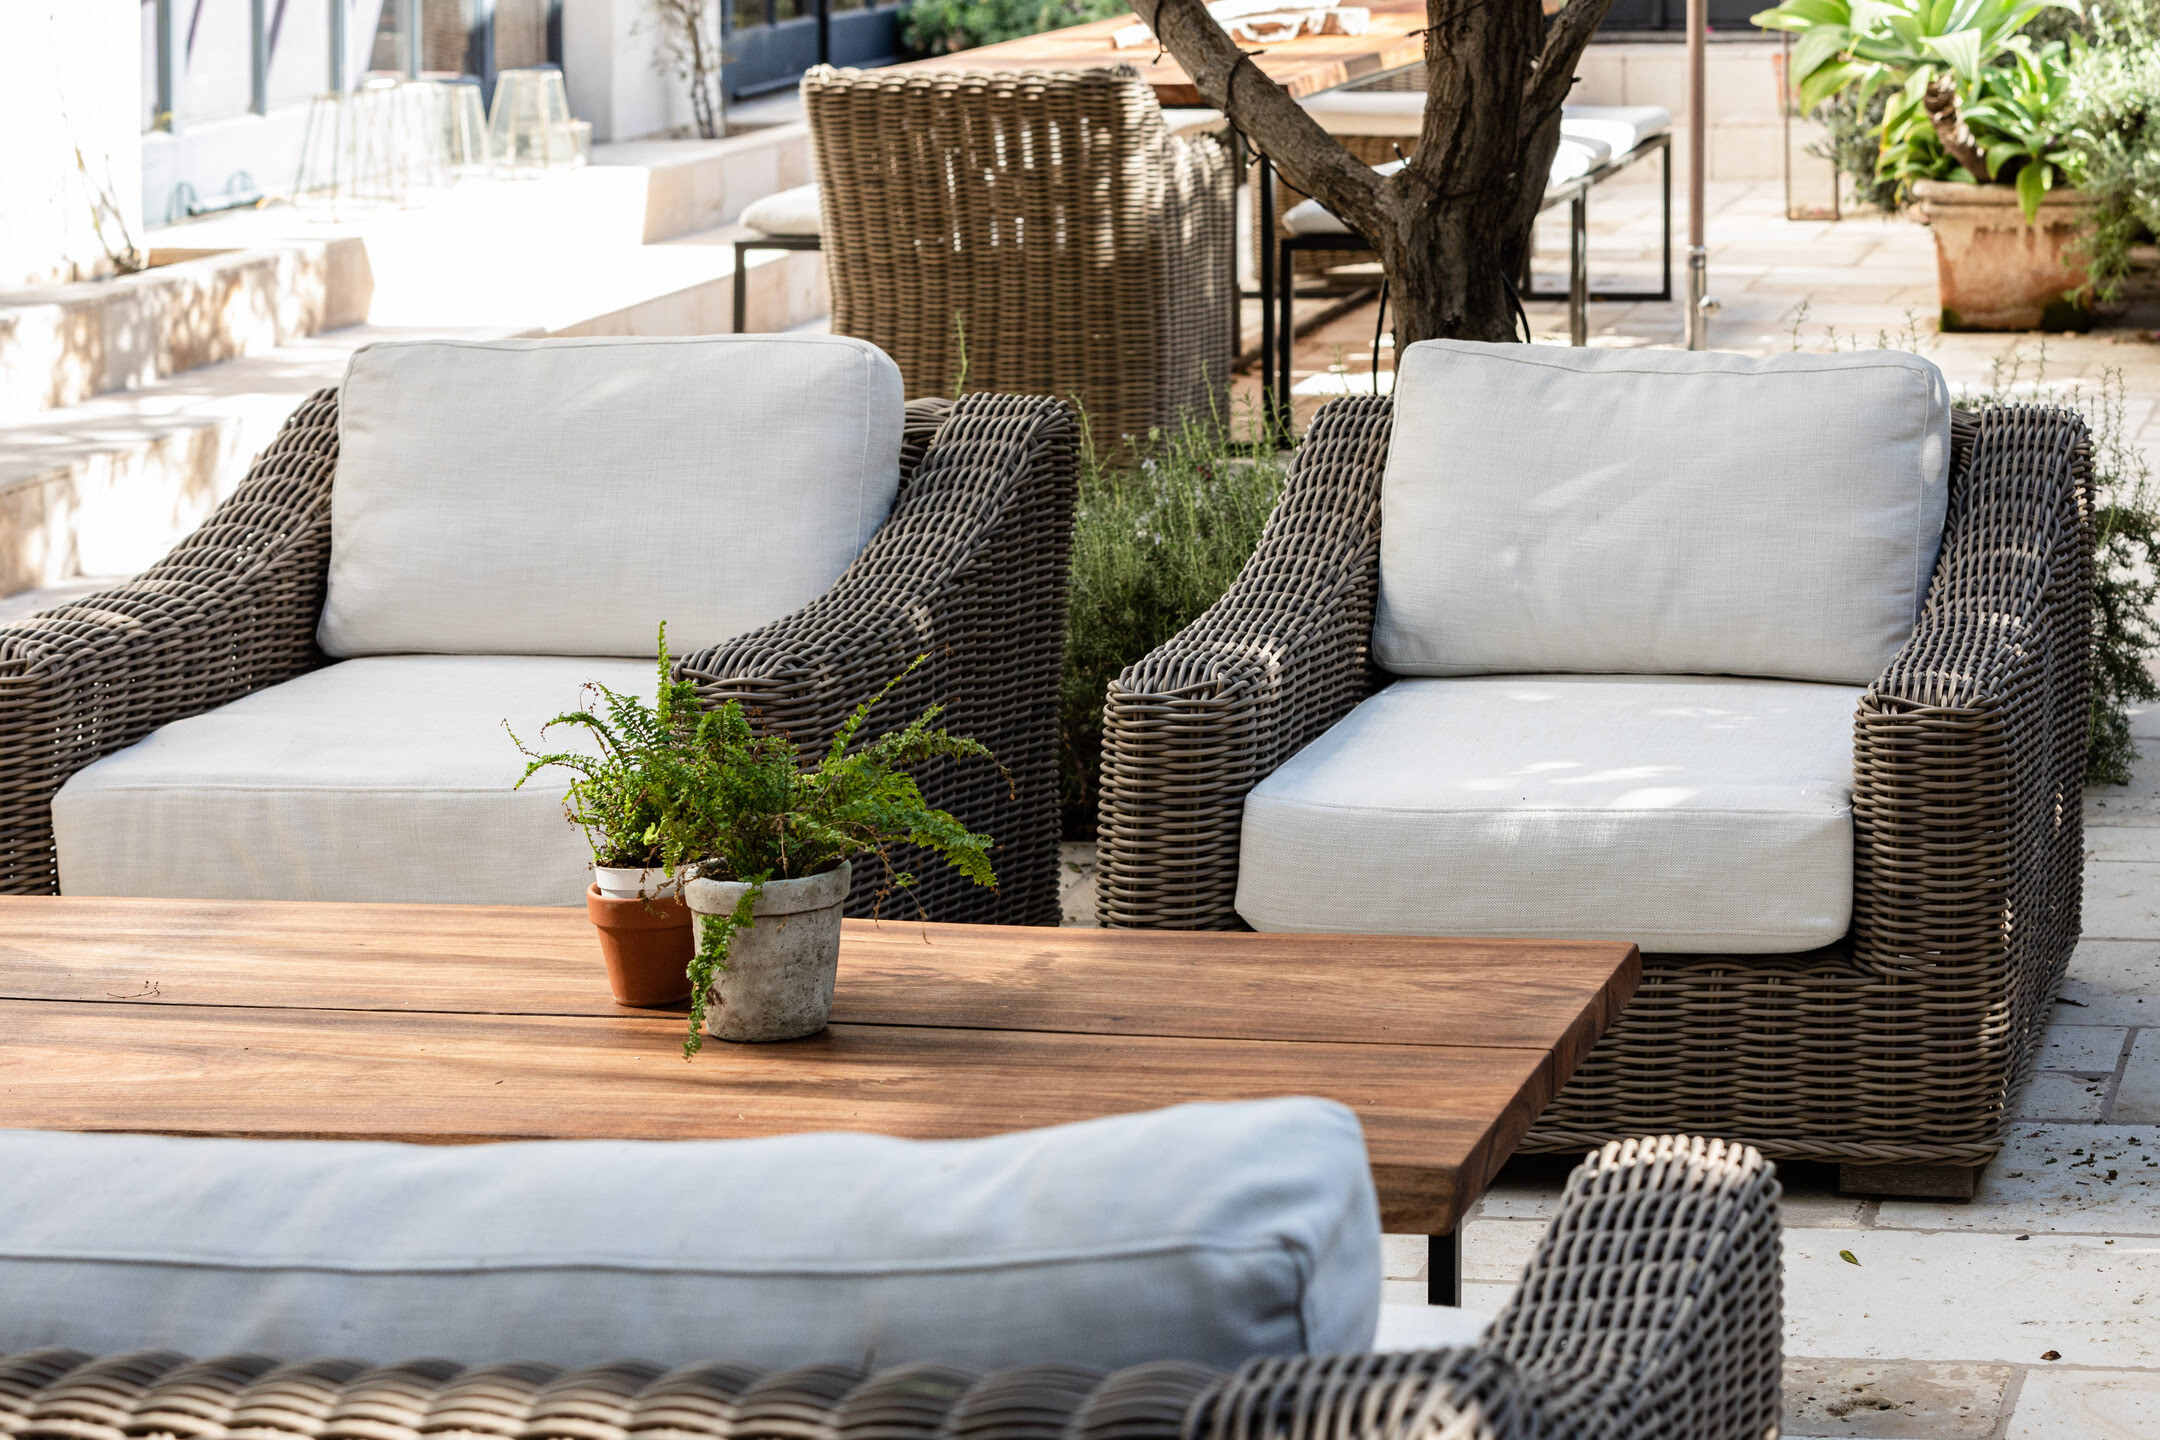 How To Remove Mold And Mildew From Outdoor Furniture